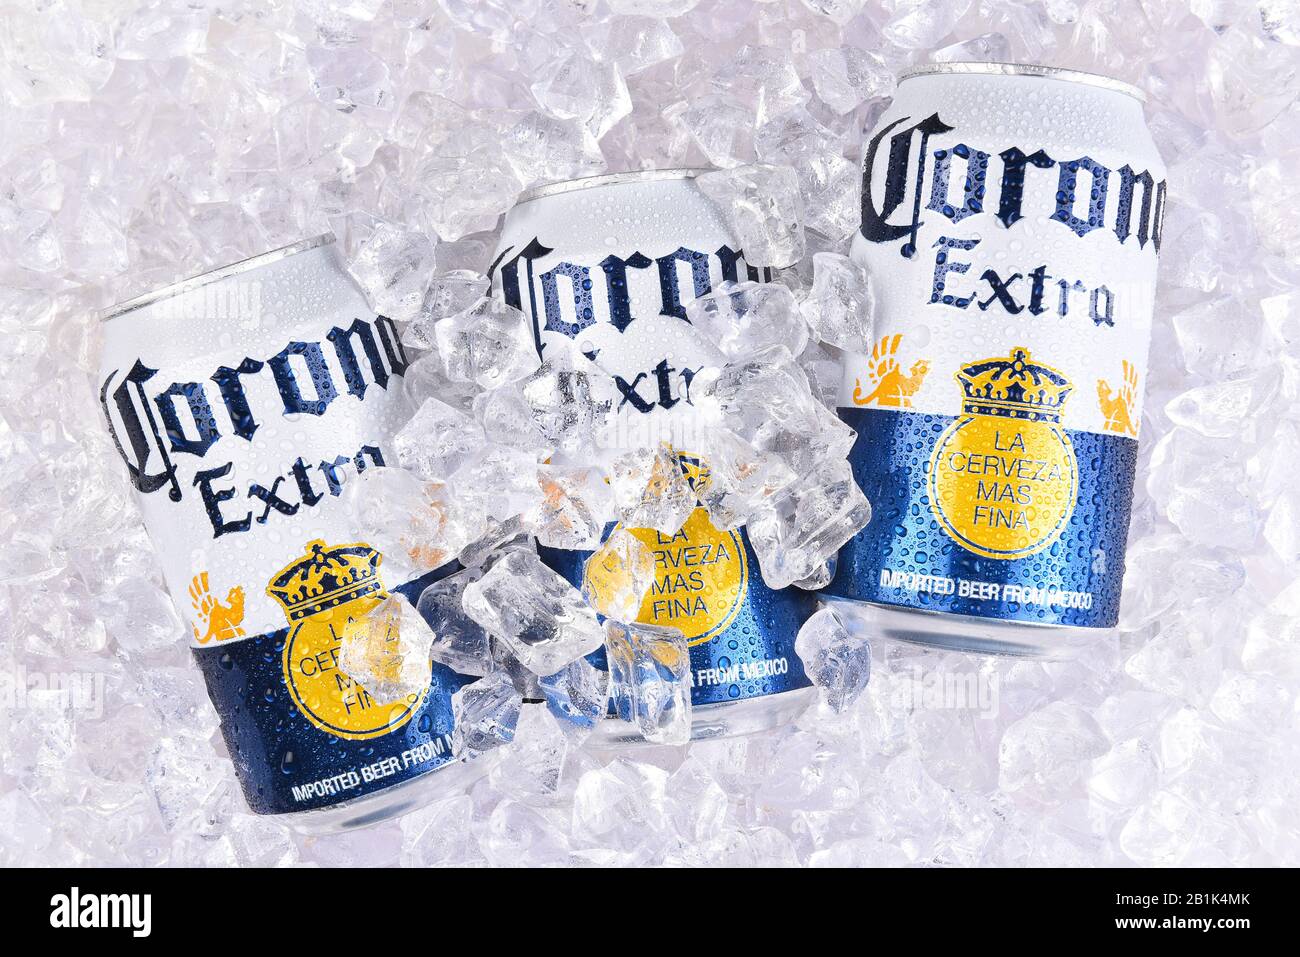 IRVINE, CALIFORNIA - MARCH 29, 2018: Corona Extra beer cans in ice. Corona is the most popular import in the USA. Stock Photo